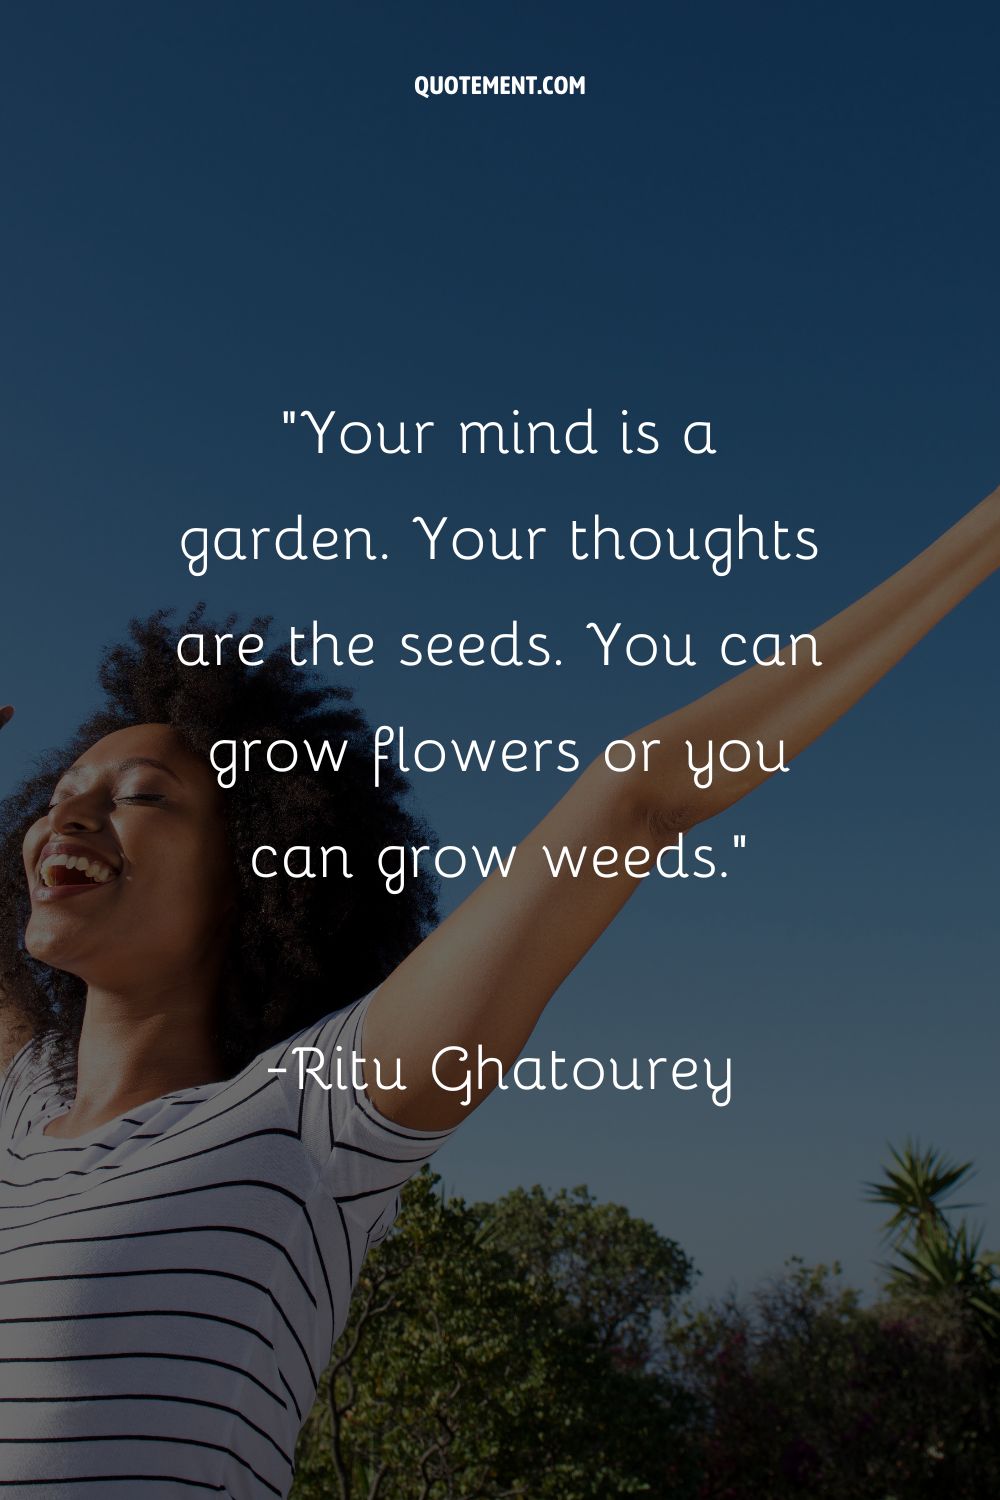 Your mind is a garden. Your thoughts are the seeds. You can grow flowers or you can grow weeds